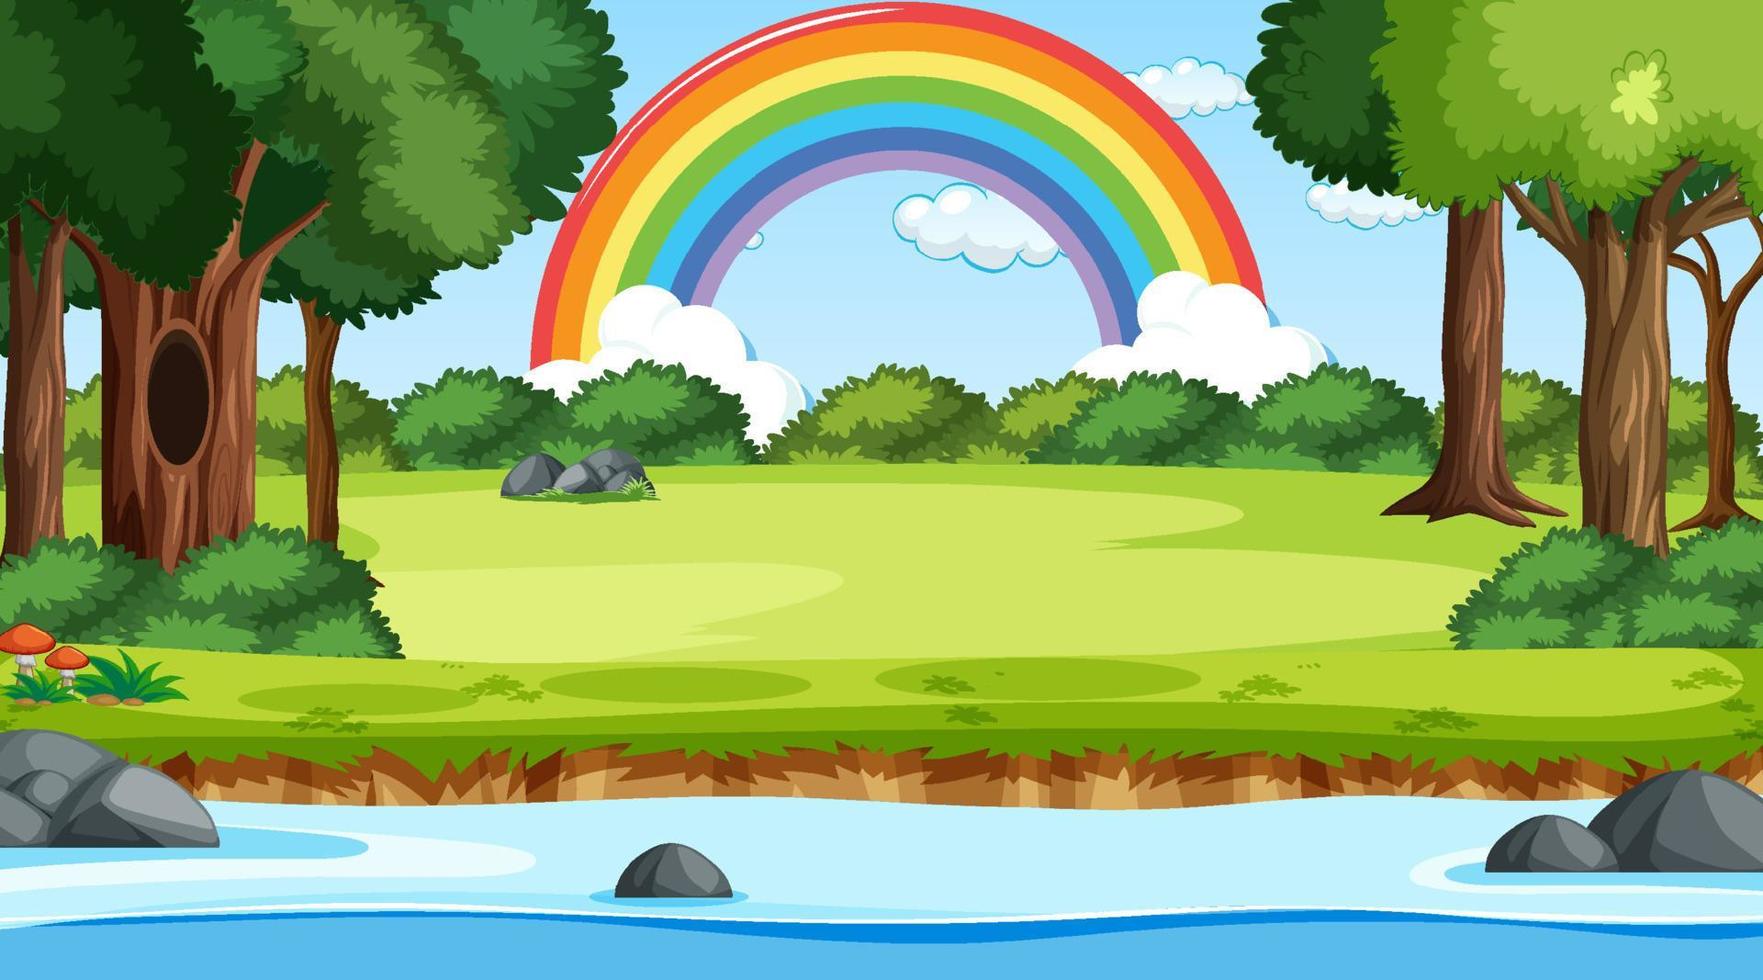 Nature scene background with rainbow in the sky vector